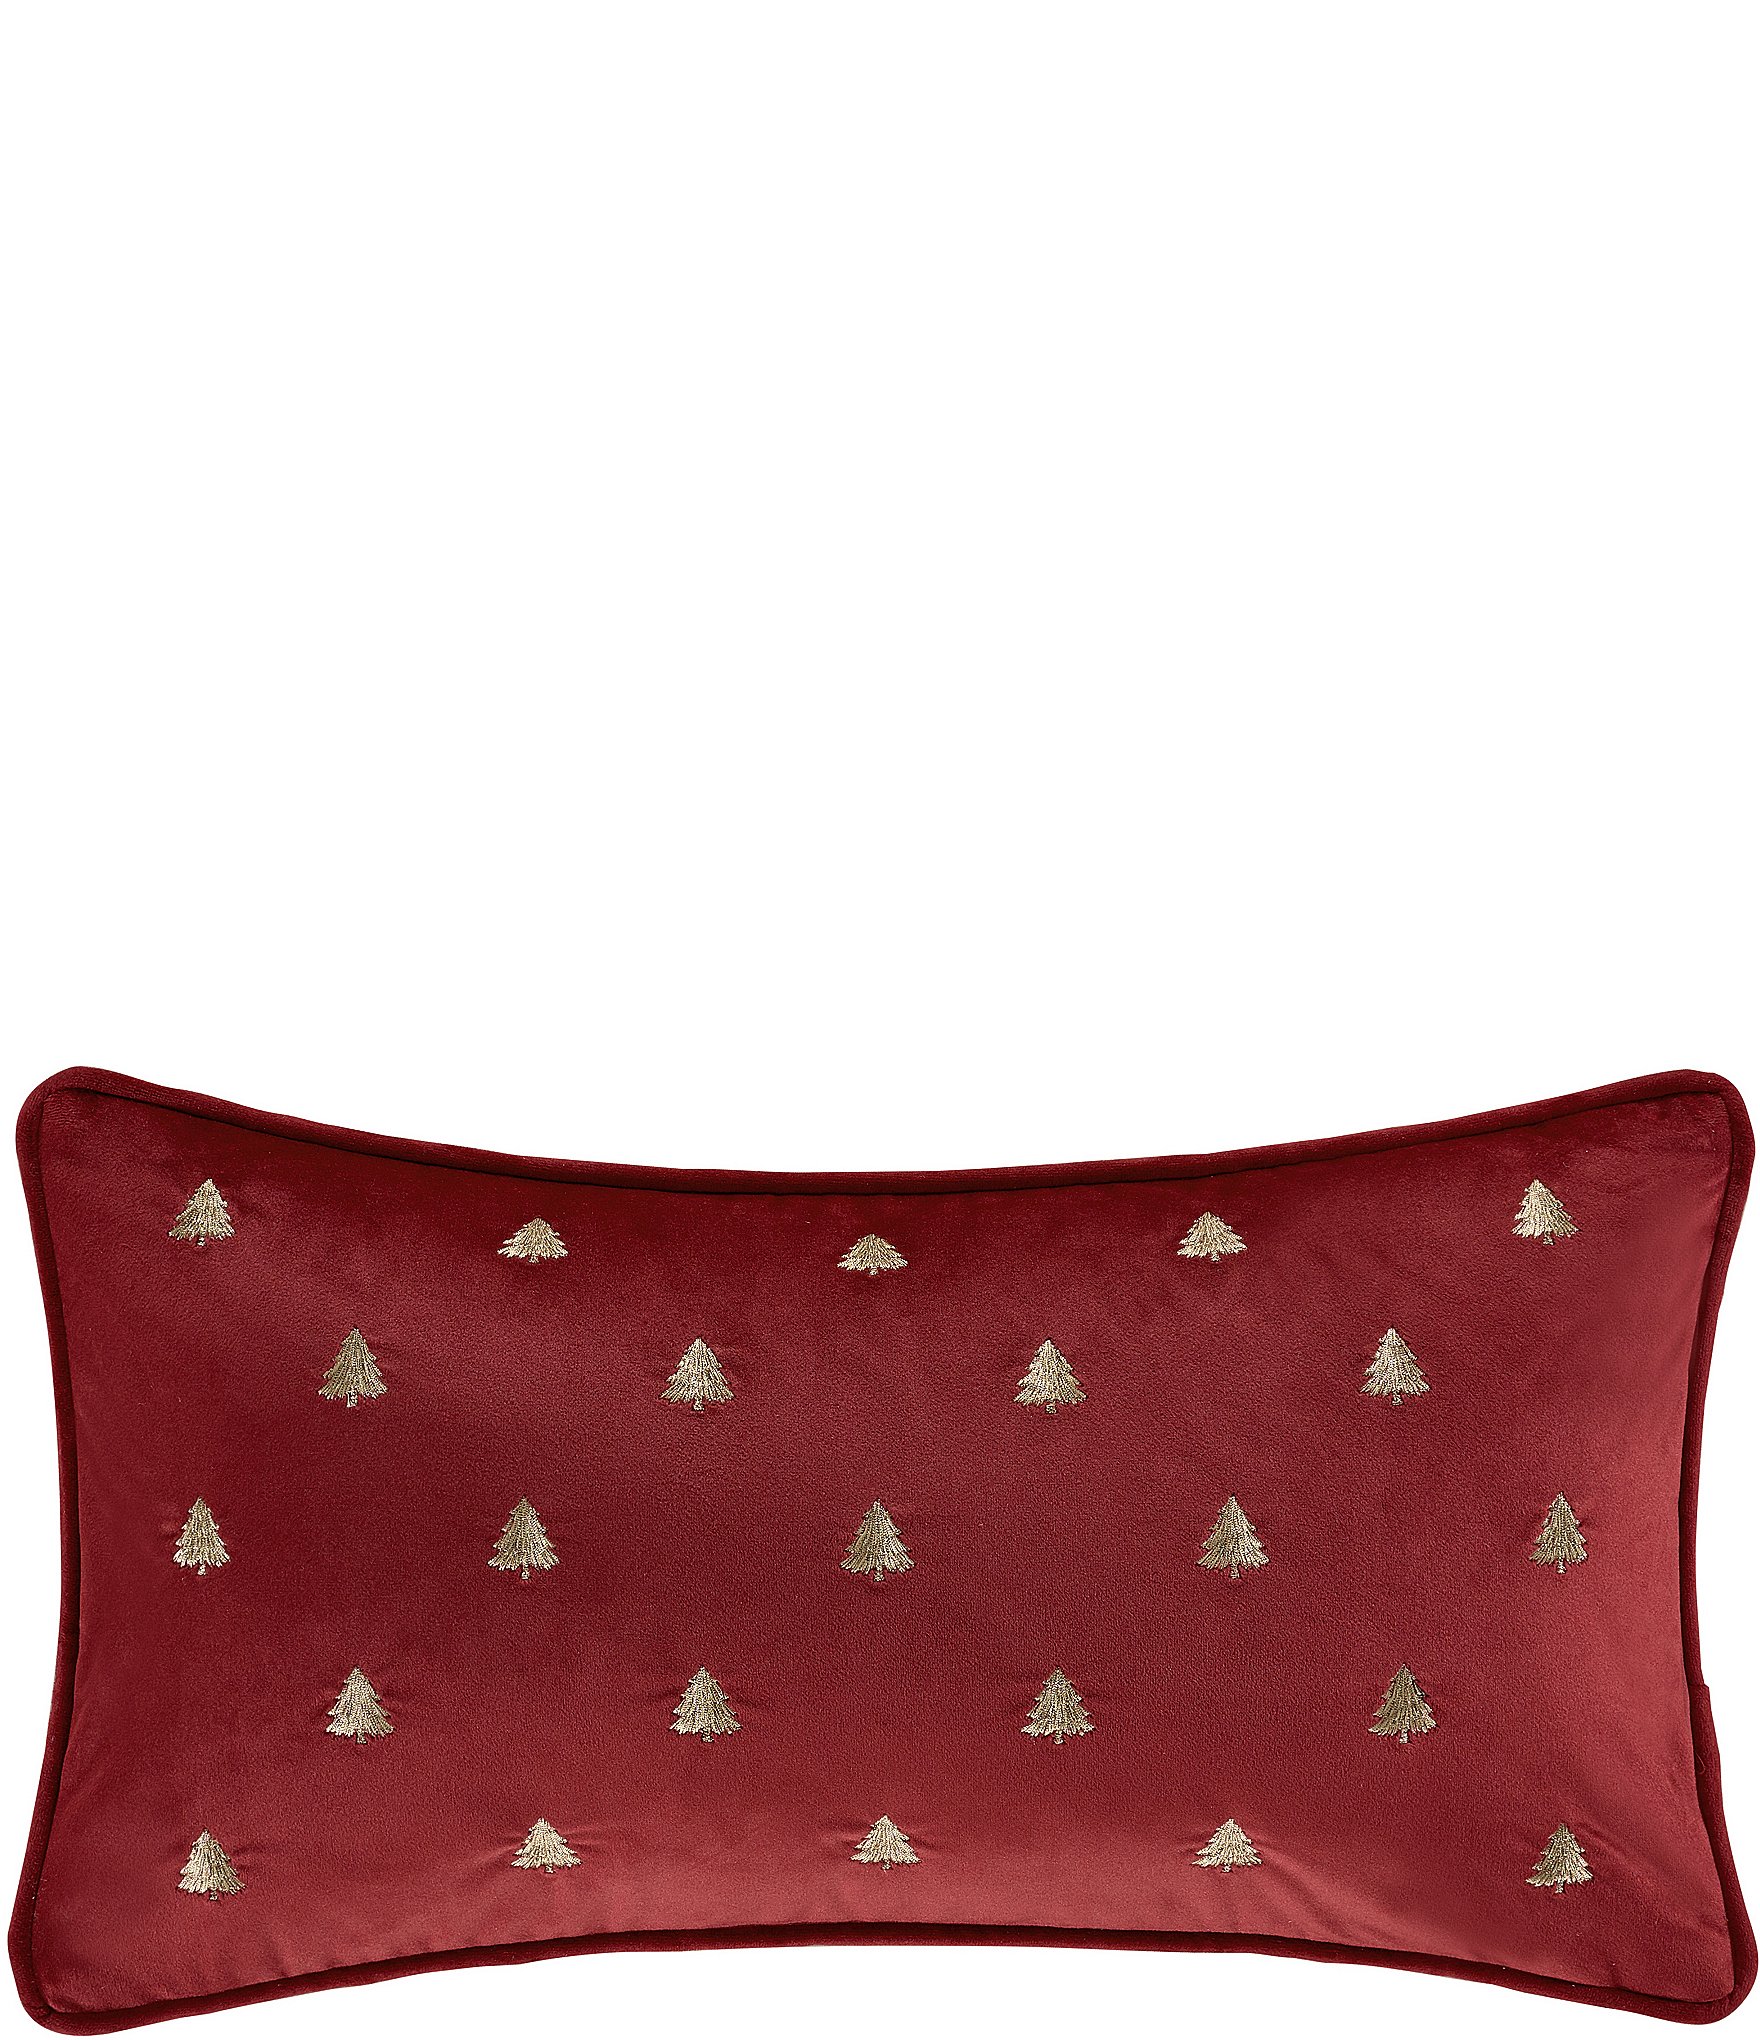 https://dimg.dillards.com/is/image/DillardsZoom/zoom/j.-queen-new-york-holiday-collection-christmas-tree-boudoir-embellished-decorative-pillow/00000000_zi_5de82344-f87f-49ae-aa33-6e16cca75241.jpg